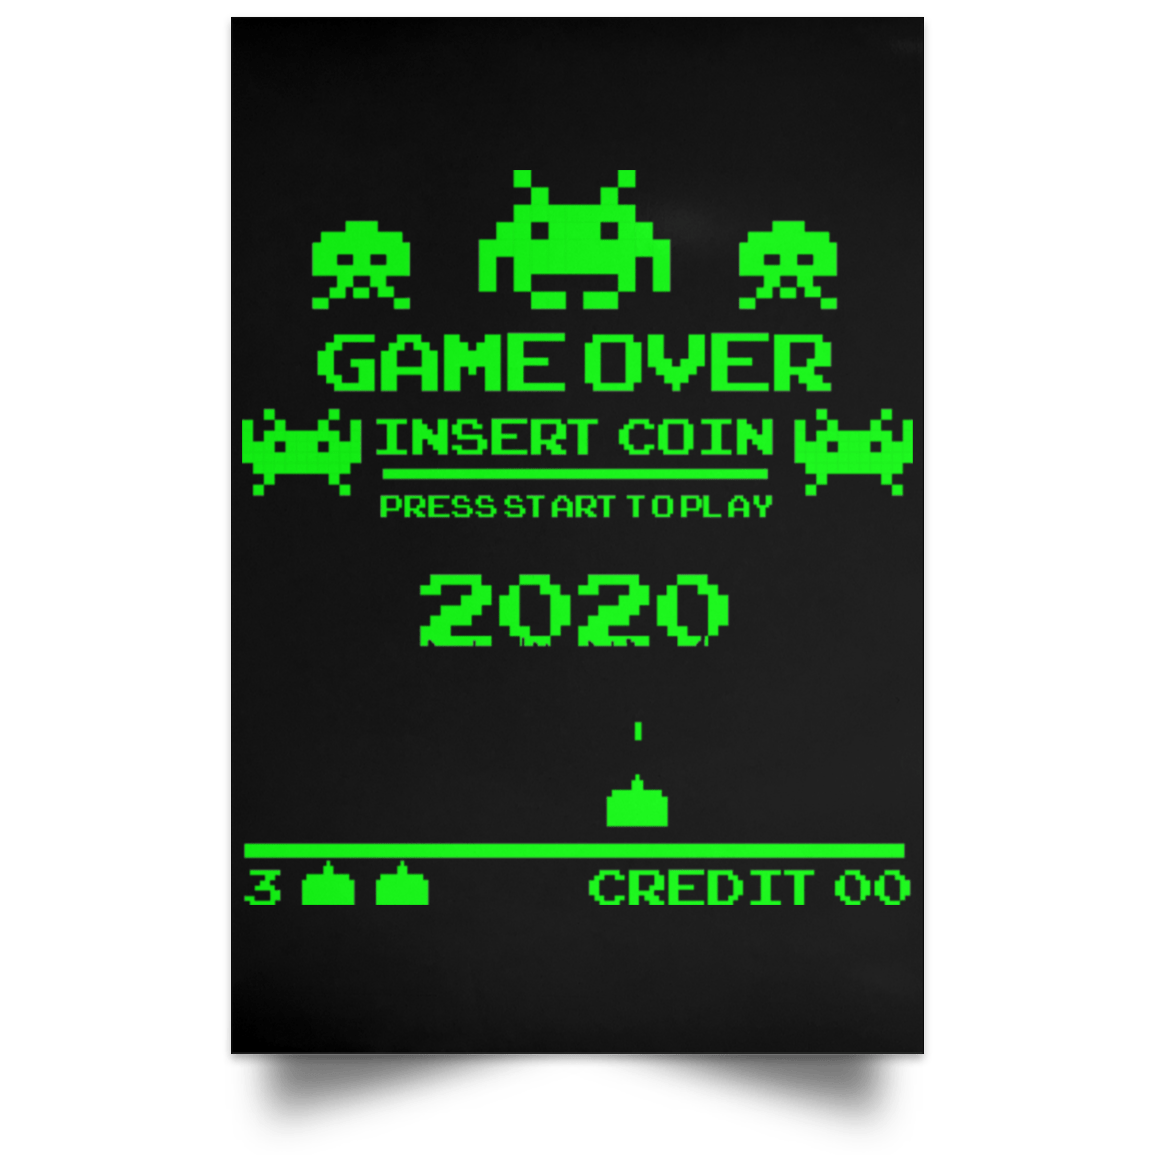 Space invaders 2020 Portrait Poster